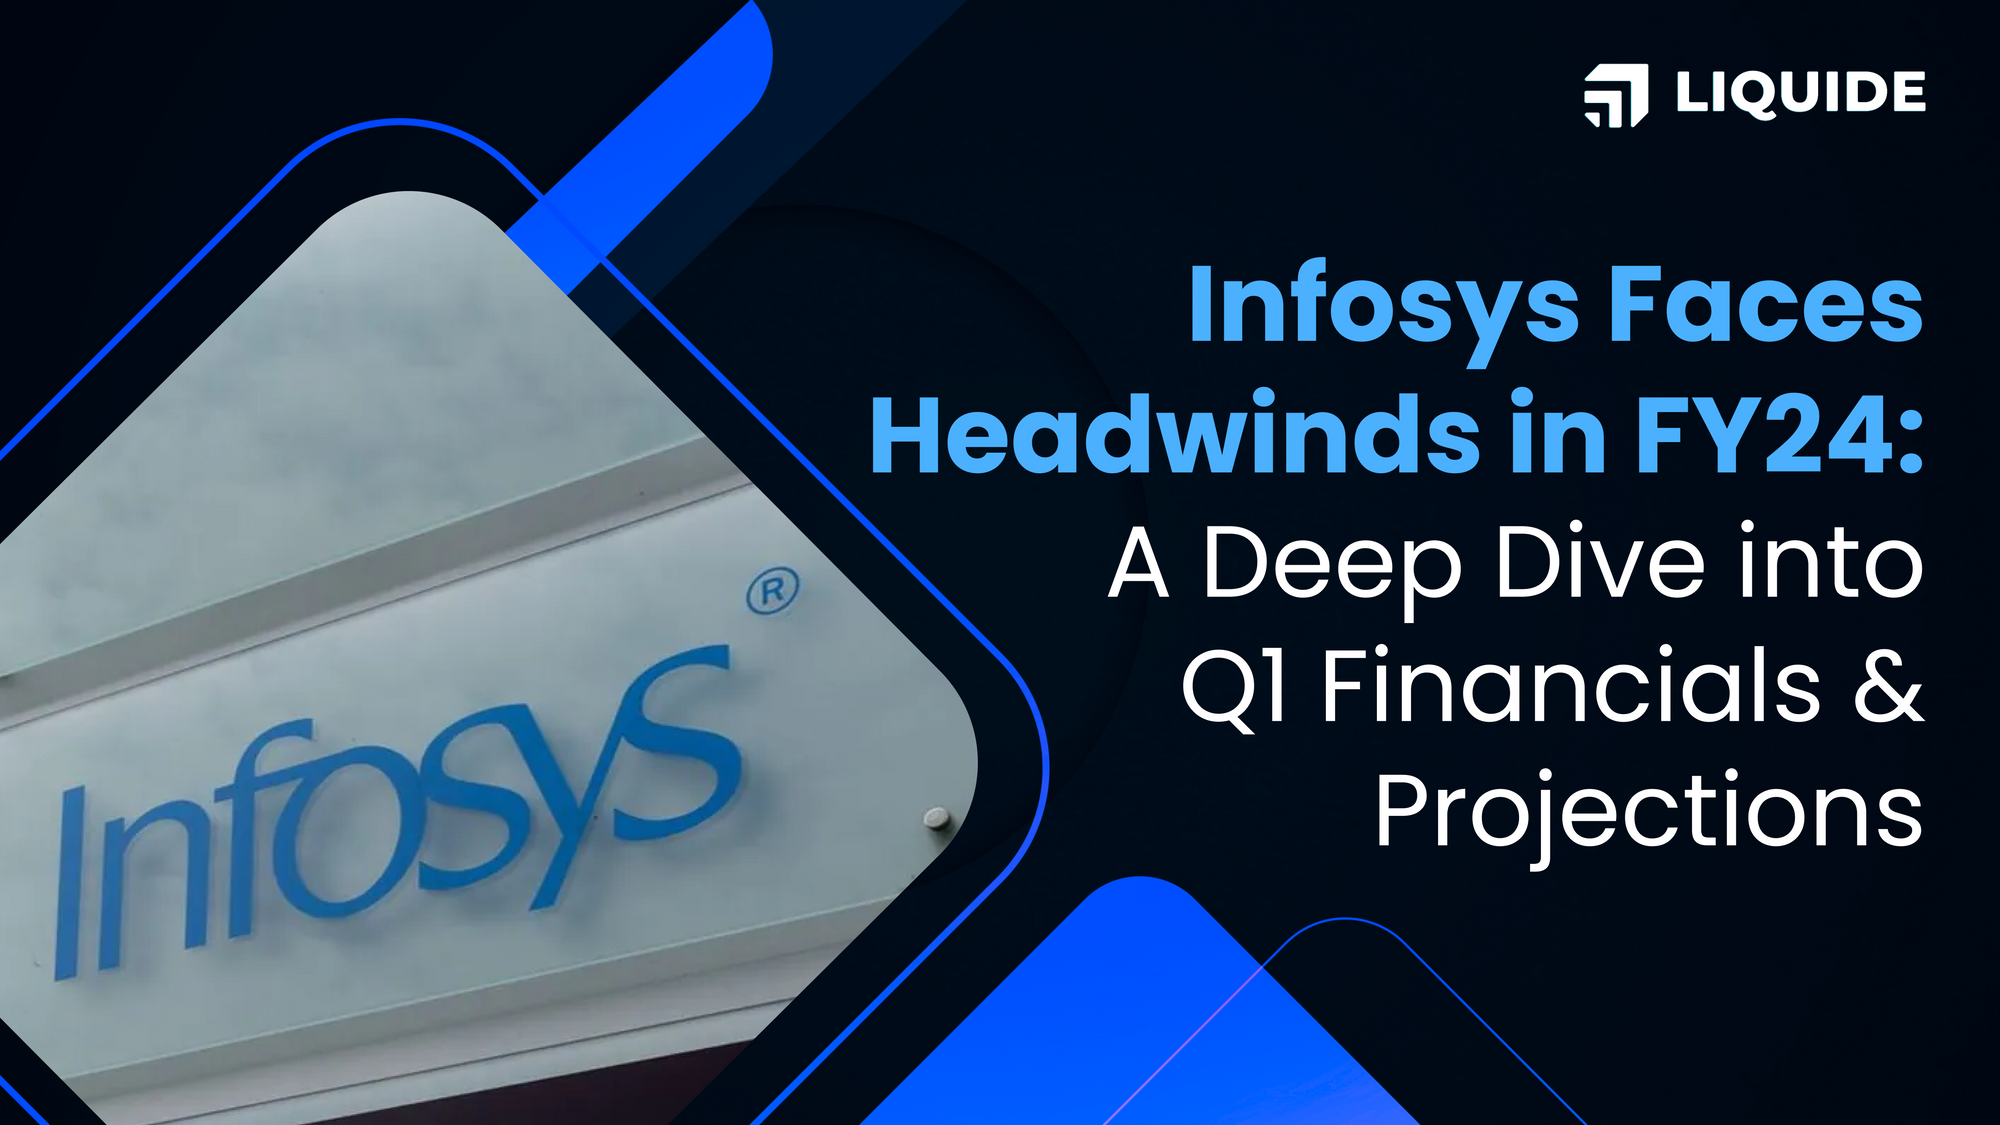 infosys, INFY, liquide life, liquide, INFY FY24 Q1 results, INFY Q1 results